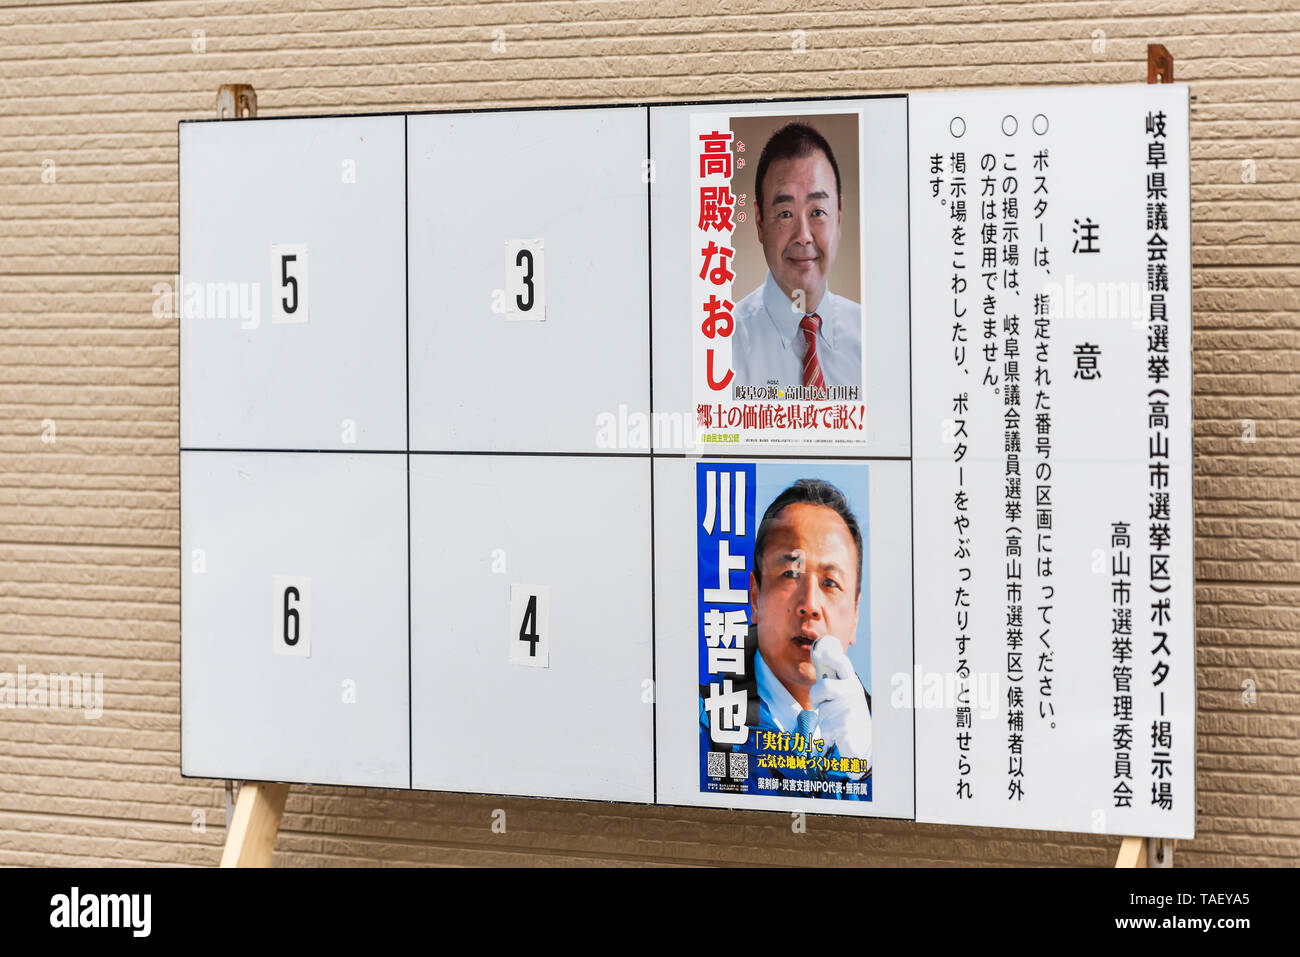 Takayama, Japan - April 8, 2019: Election campaign sign in Gifu prefecture on street by house building wall poster in Japanese Stock Photo